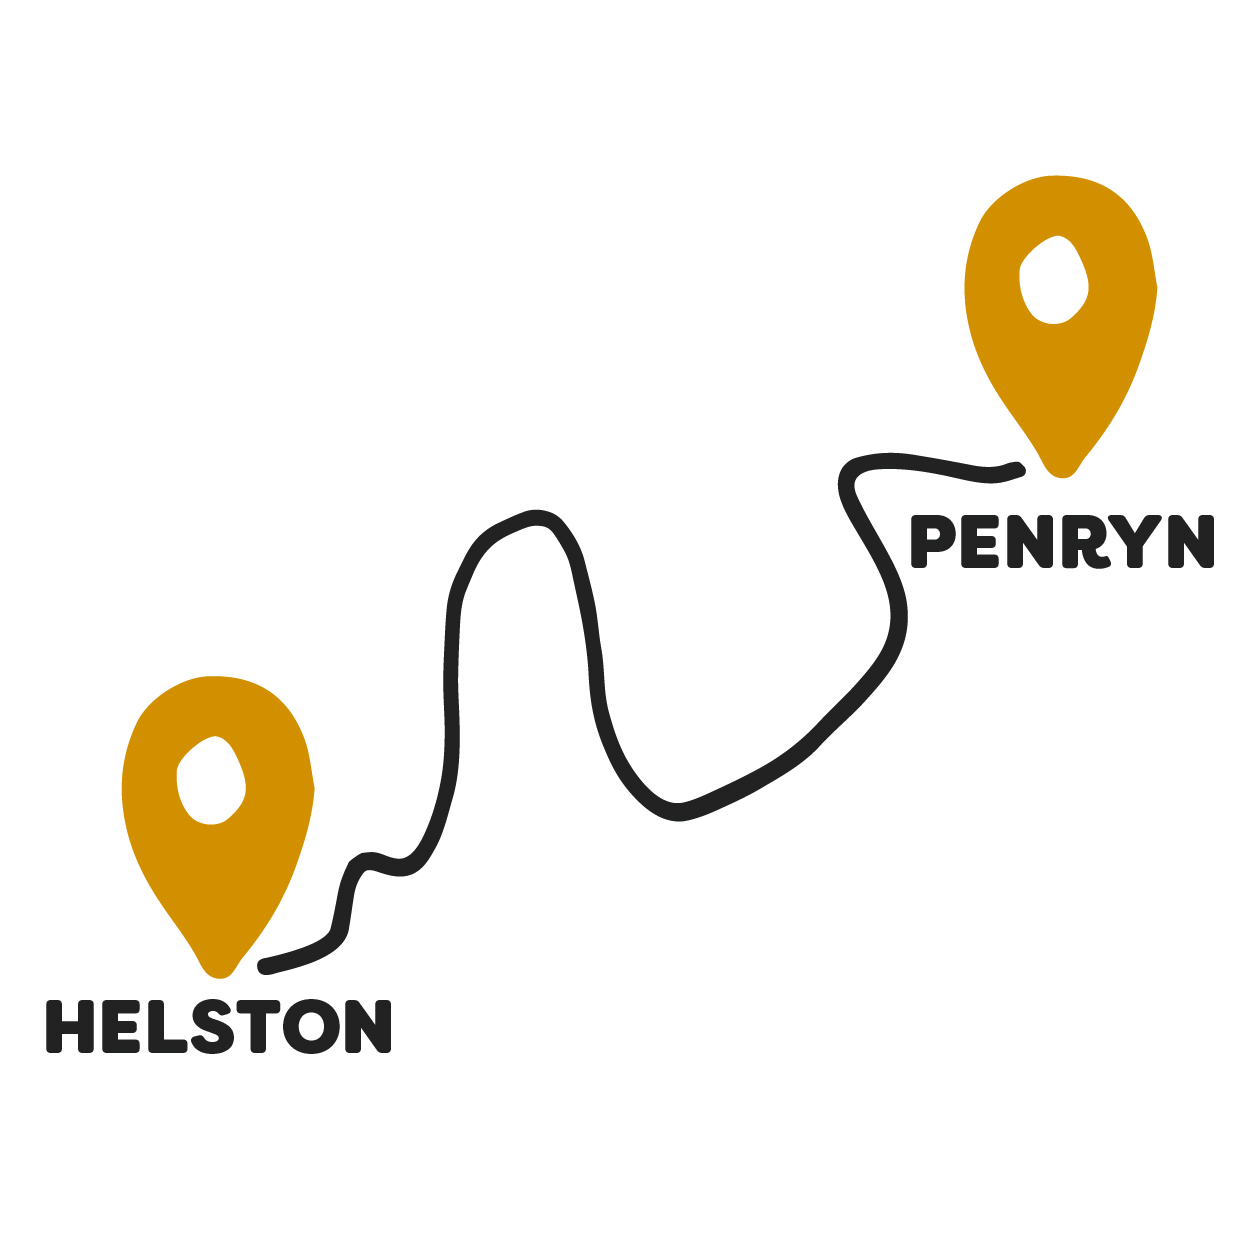 The Cornish Oven Van Routes_Penryn and Helston